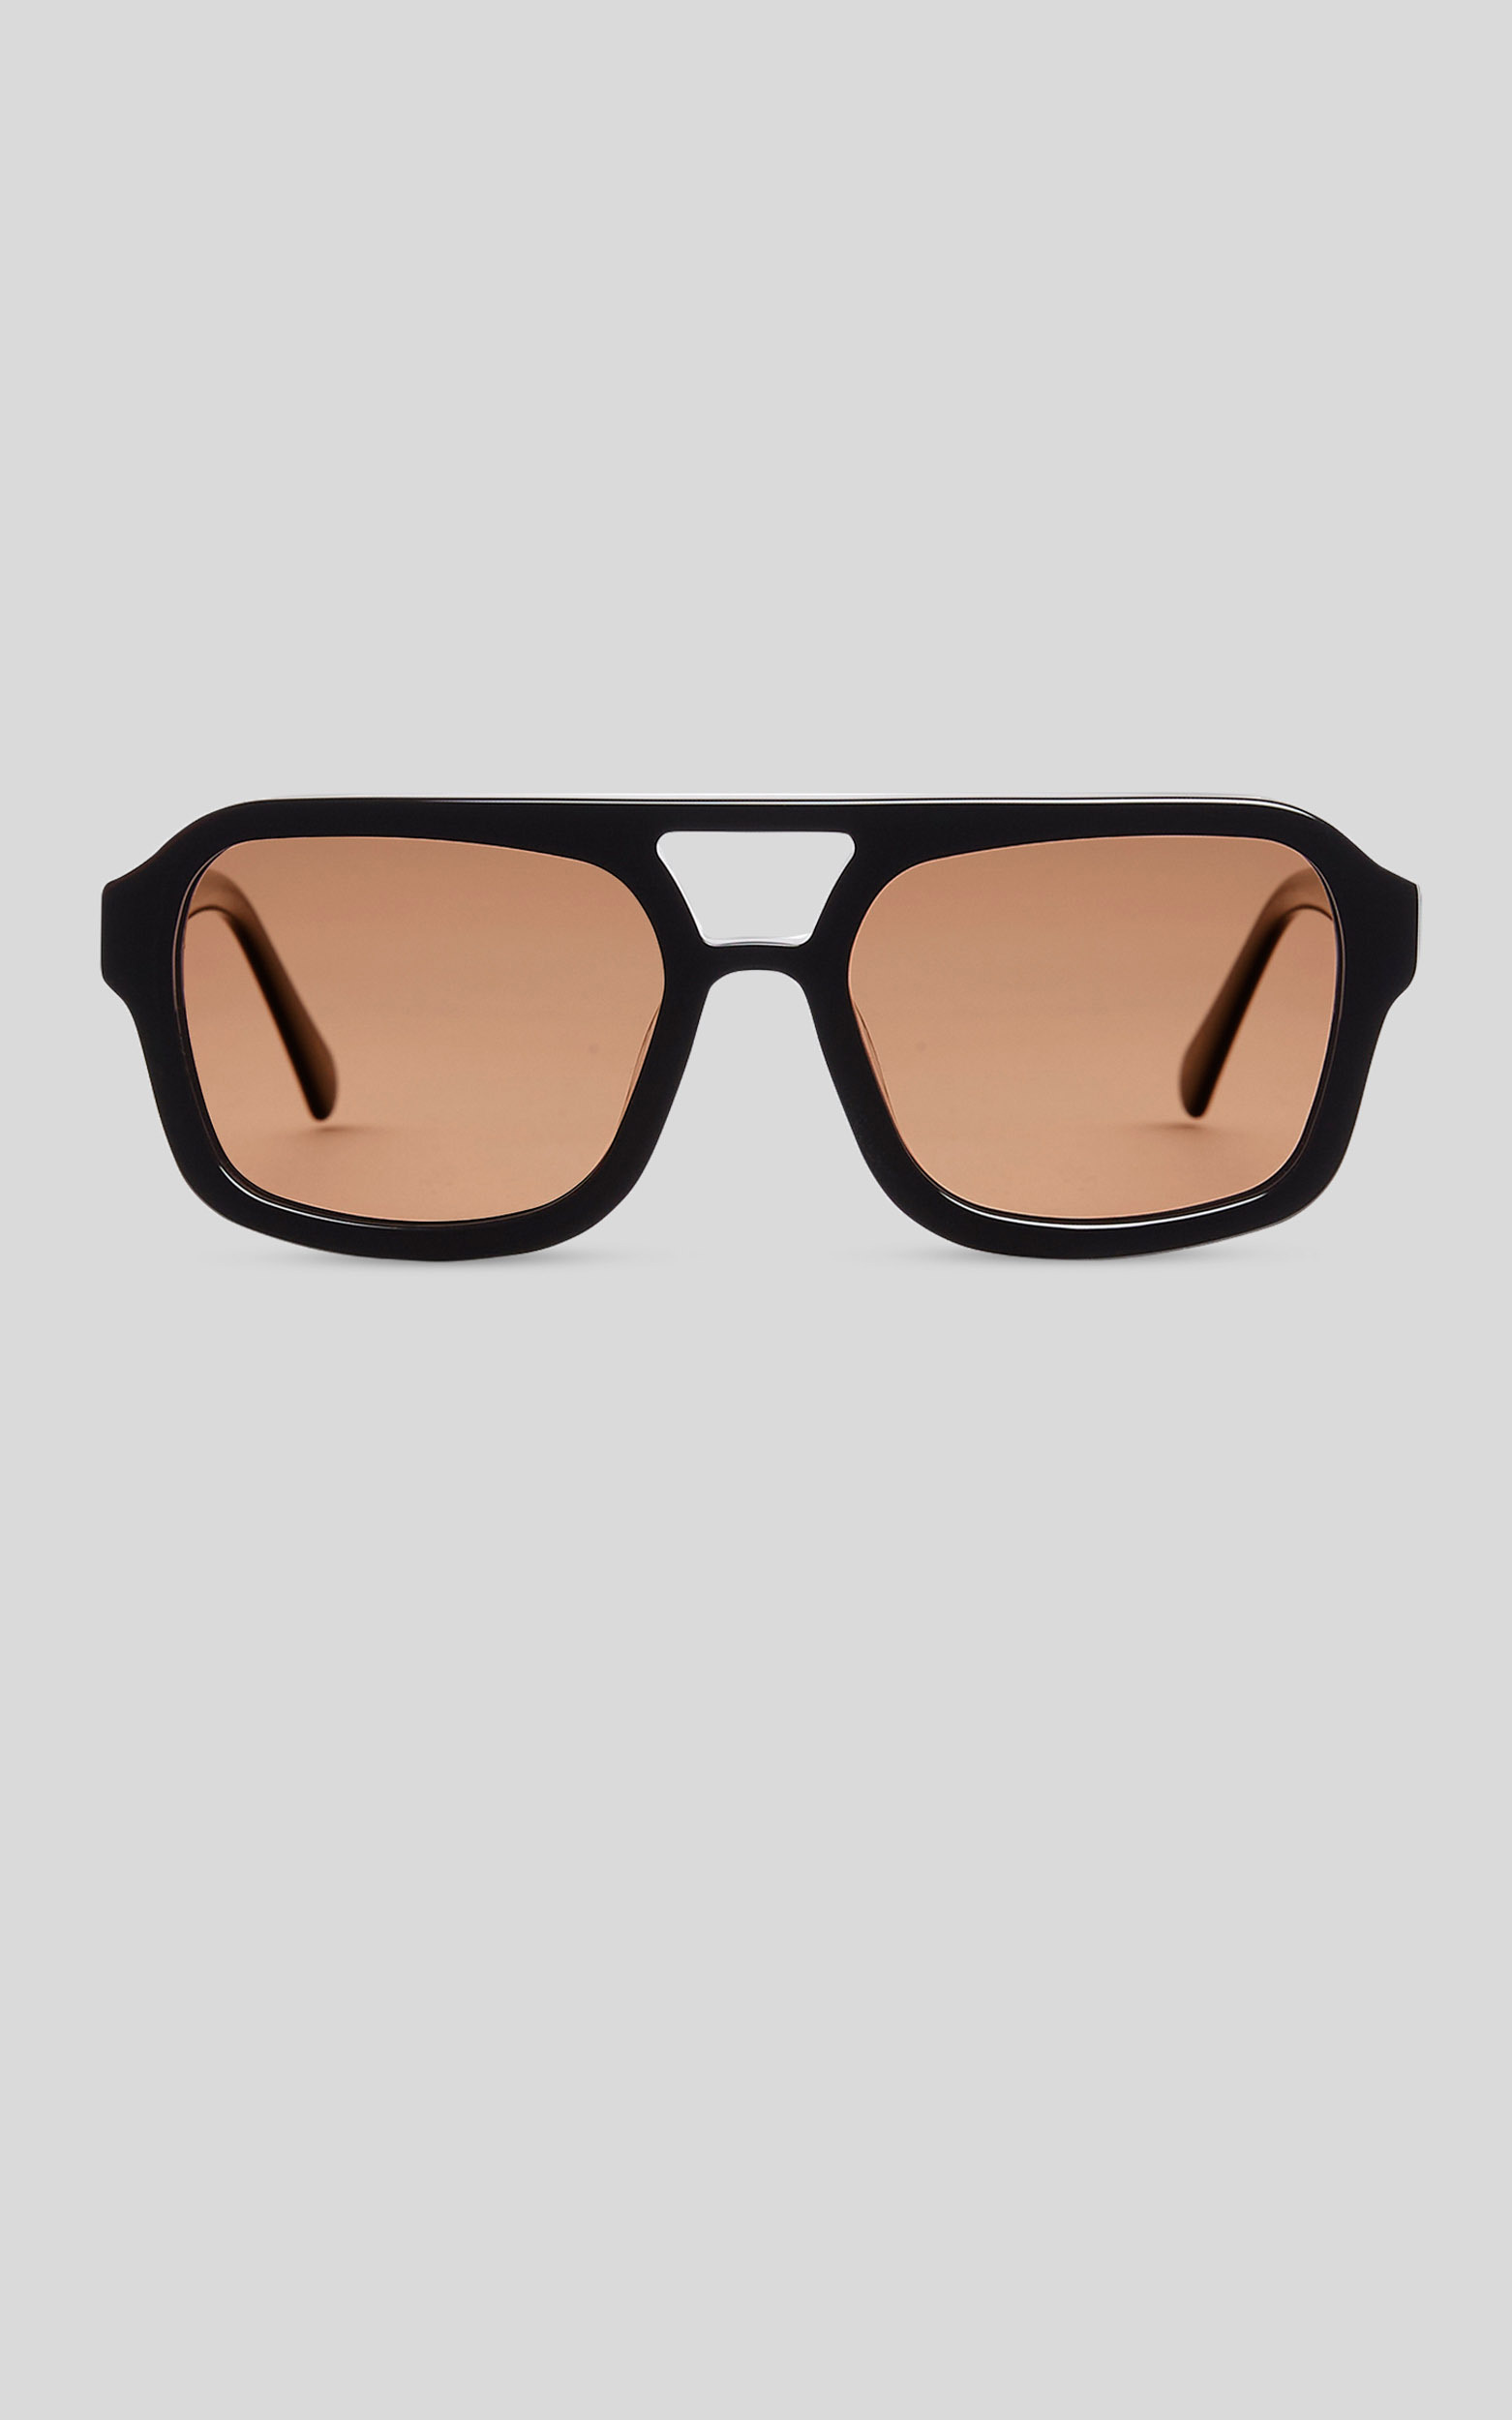 BANBE EYEWEAR - THE MOSS in Black-Cocoa - NoSize, BLK1, hi-res image number null